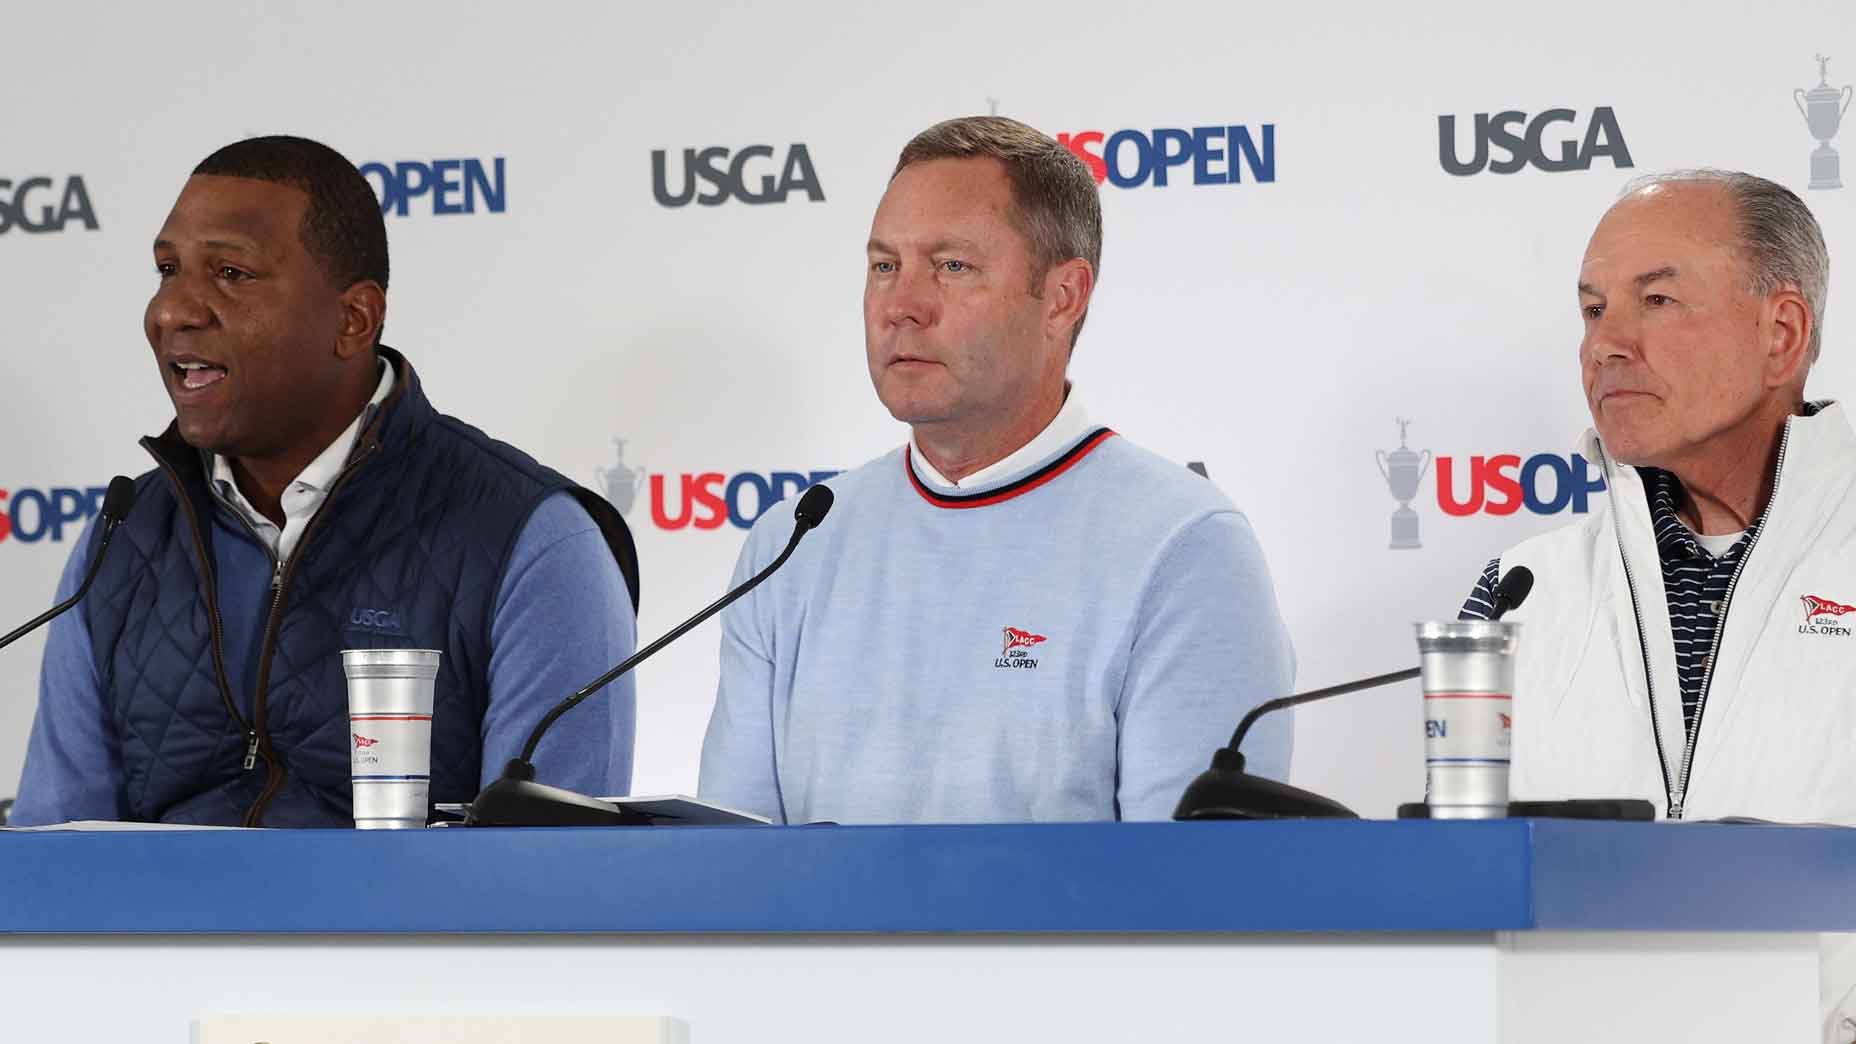 USGA President Fred Perpall, USGA CEO Mike Whan and USGA Chief Championships Officer John Bodenhamer speak to the media during a press conference prior to the 123rd U.S. Open Championship at The Los Angeles Country Club on June 14, 2023 in Los Angeles, California.